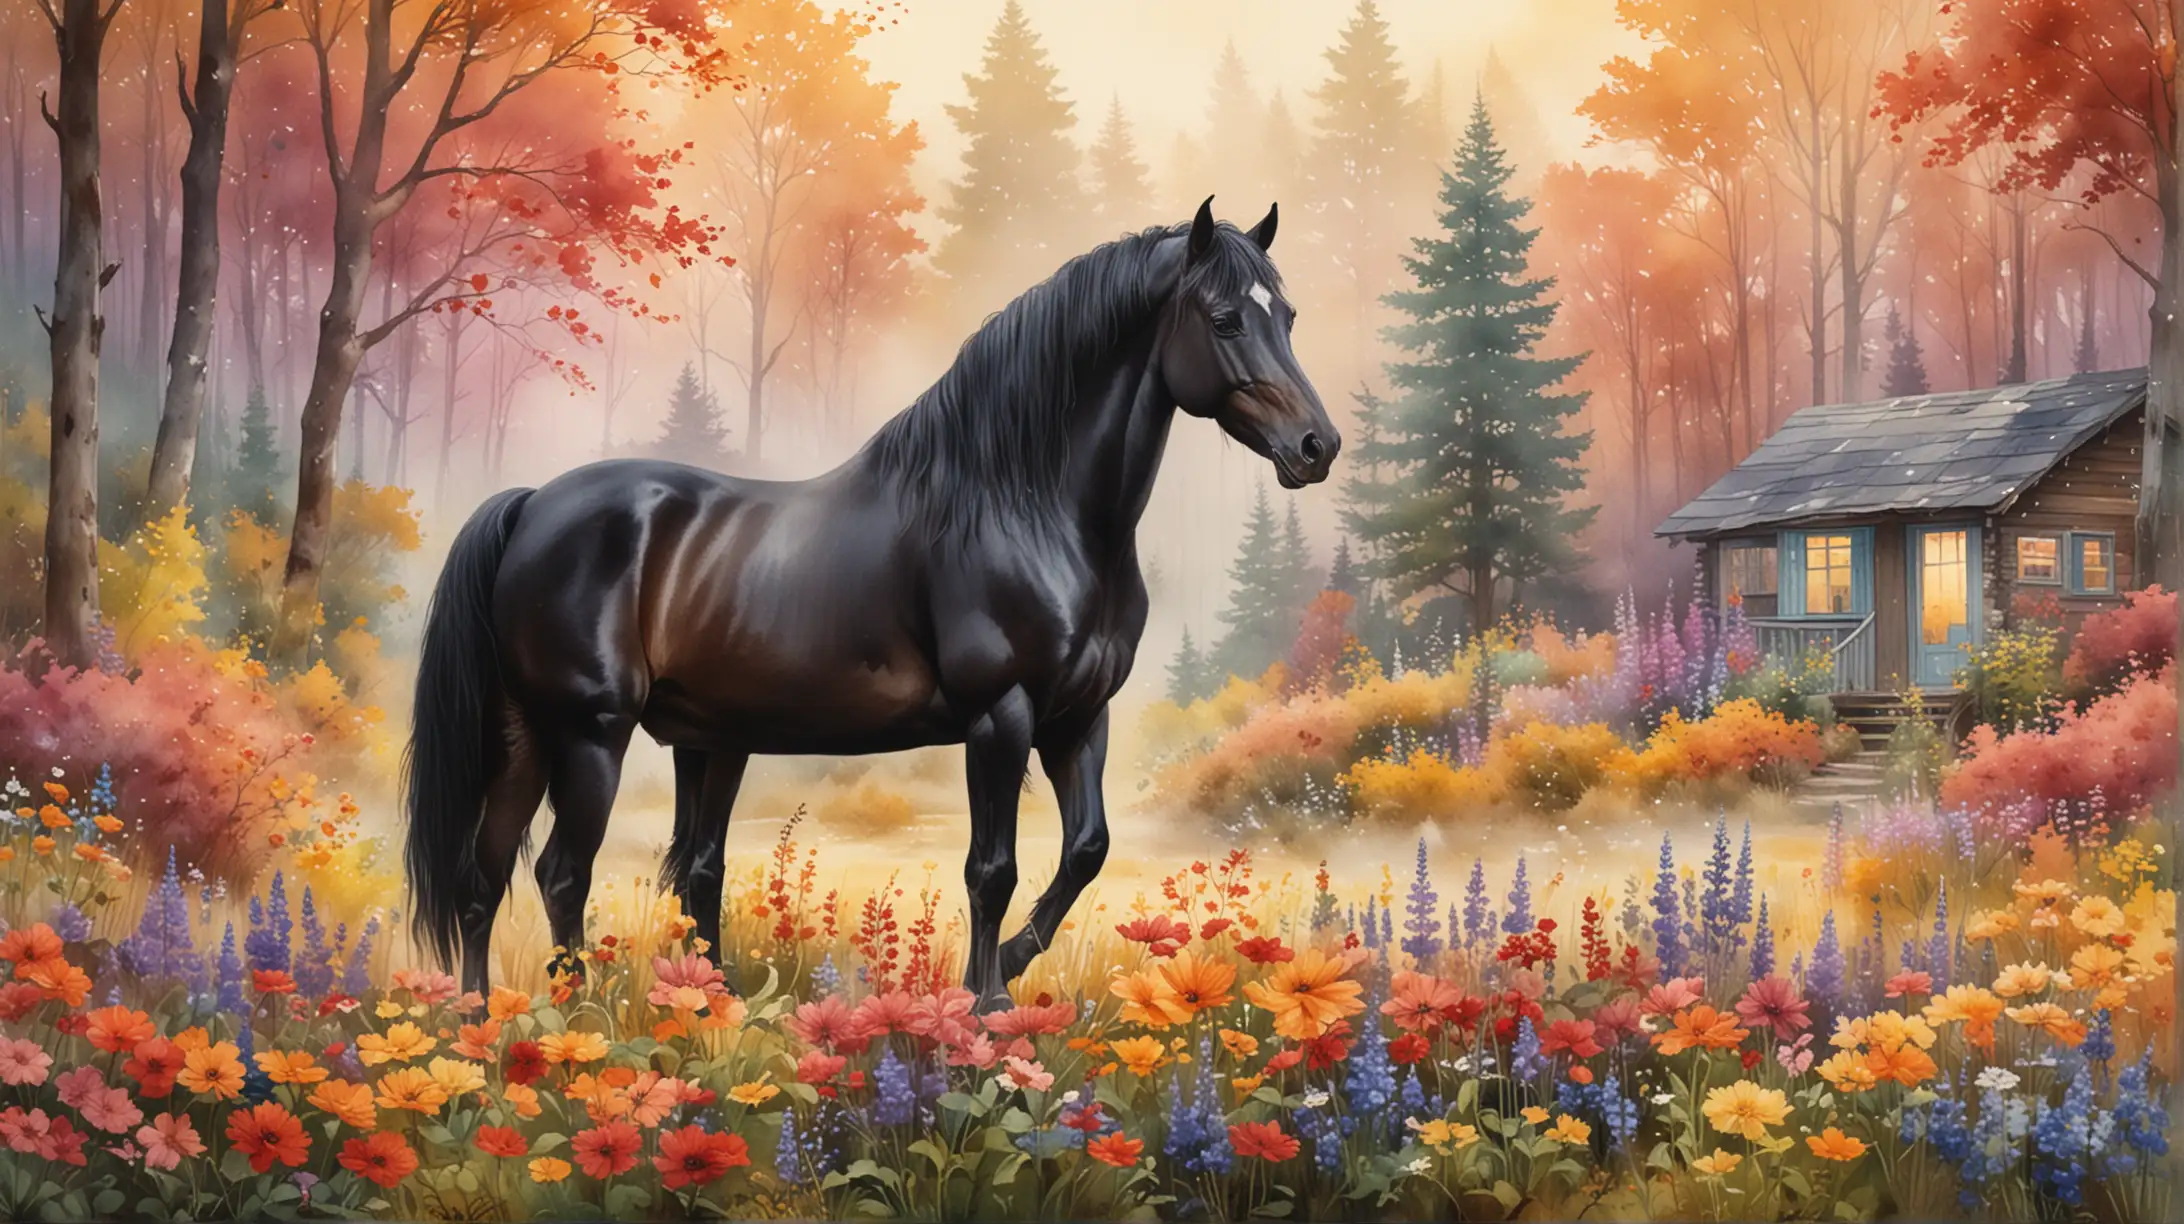 A strong black stallion, standing on hind legs, in a beautiful sunkissed forest, during the fall, surrounded by gorgeous colorful flowers, a cozy cabin sits in the background surrounded by light fog, extremely detailed watercolor style painting 